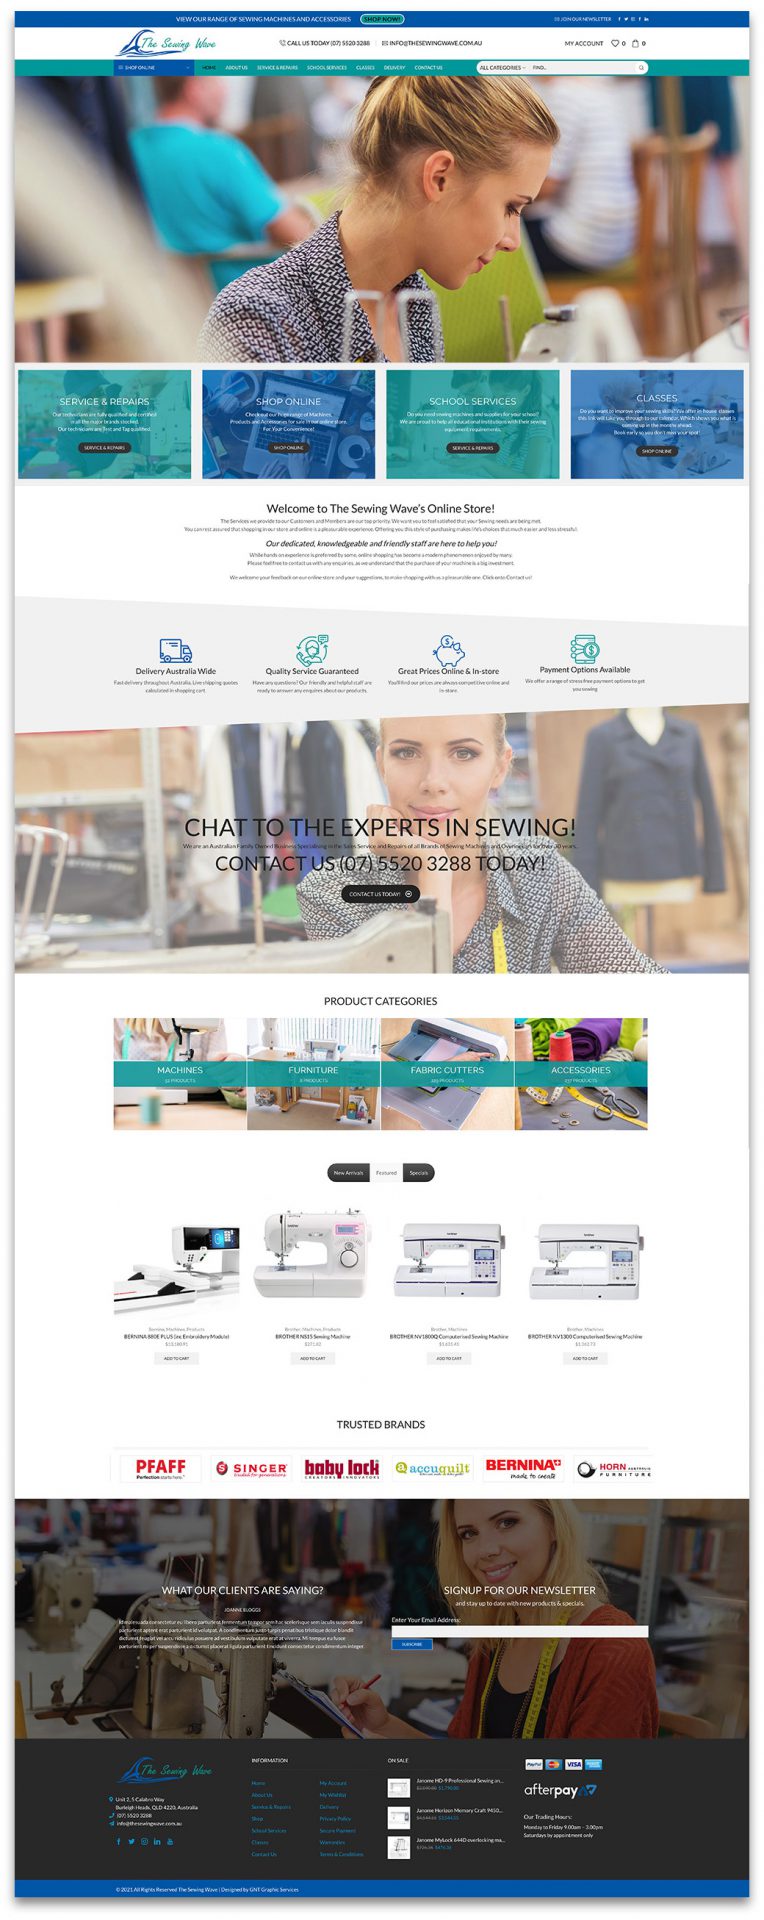 The Sewing Wave Website deigned & built by GNT Graphic Services